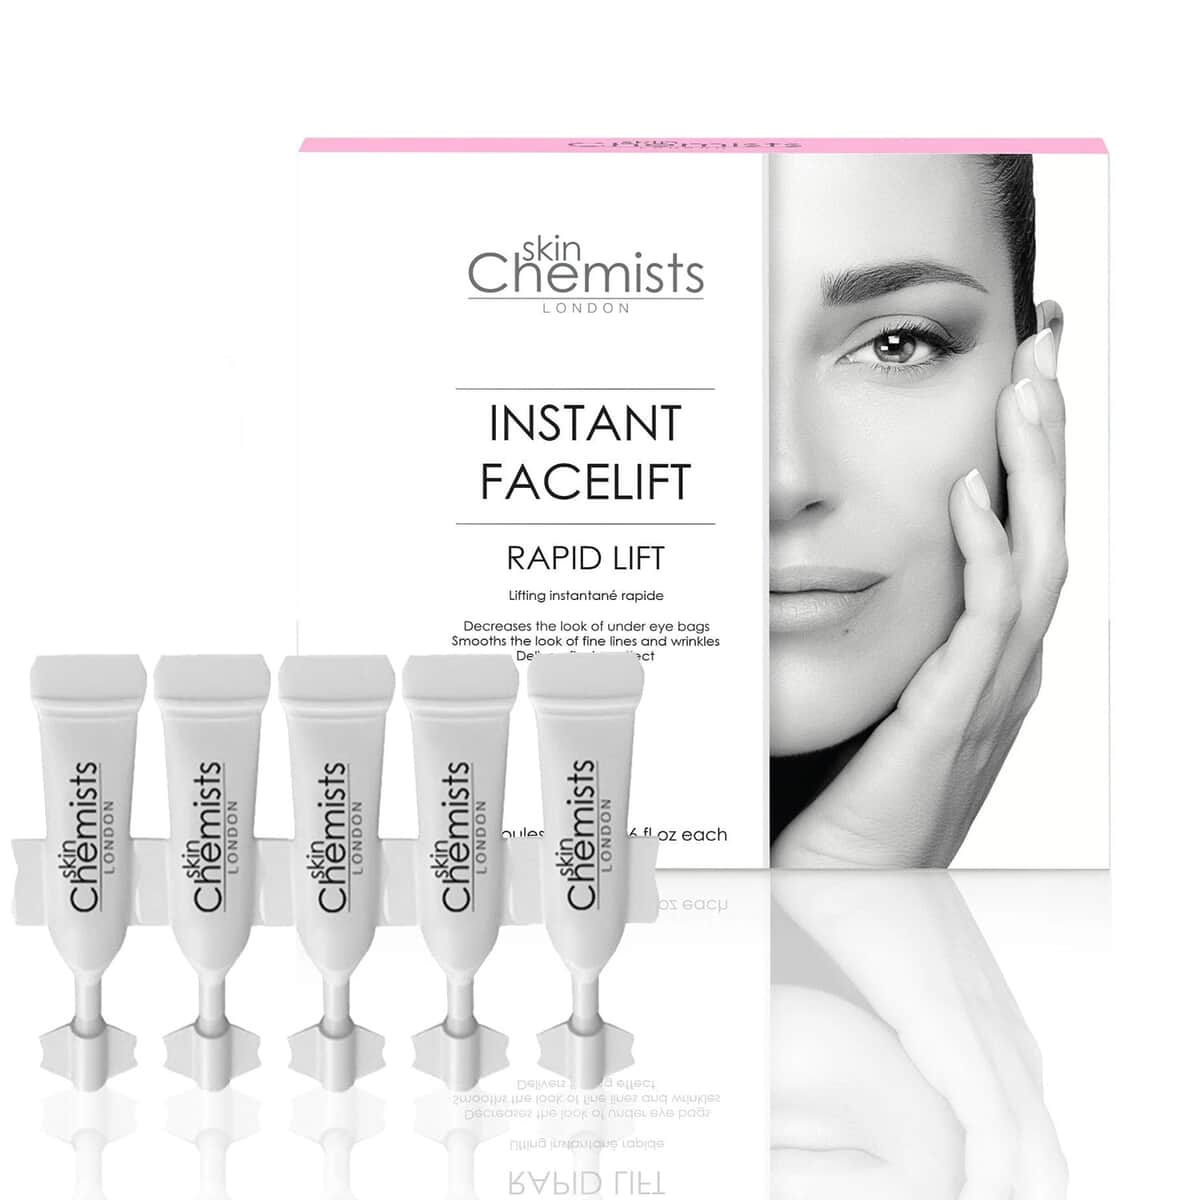 Skin Chemists Advanced Instant Facelift 5 x 2ml image number 0